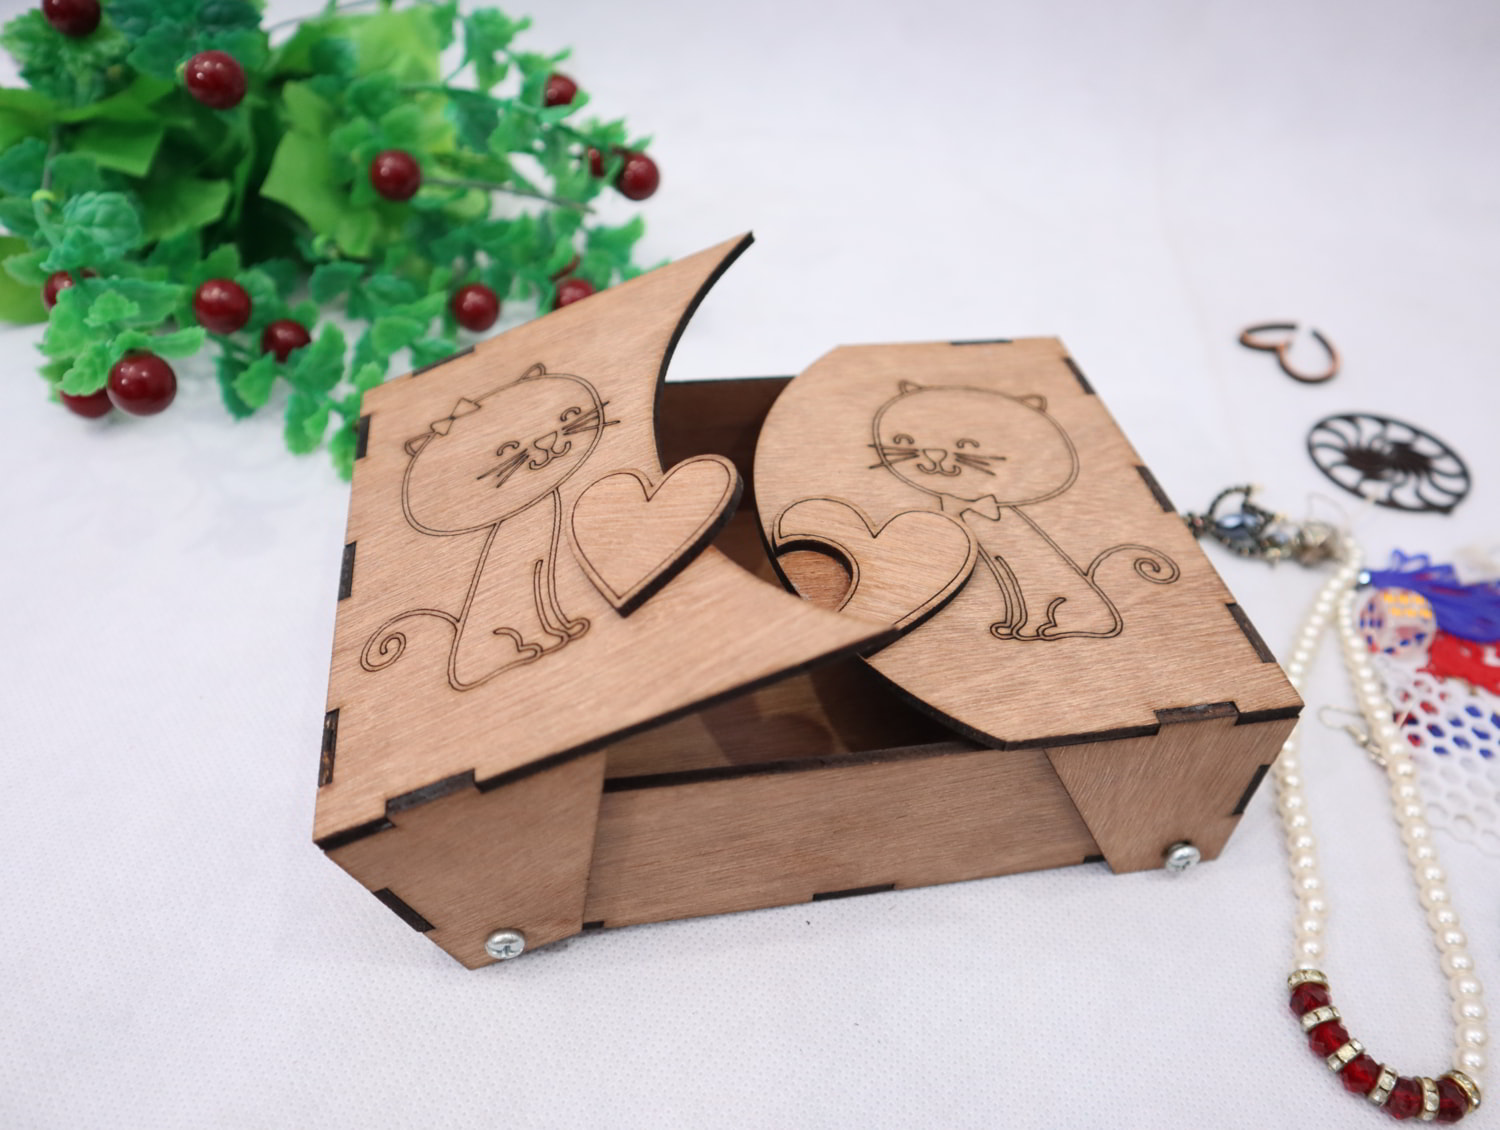 Laser Cut Wooden Gift Box 3mm Free Vector